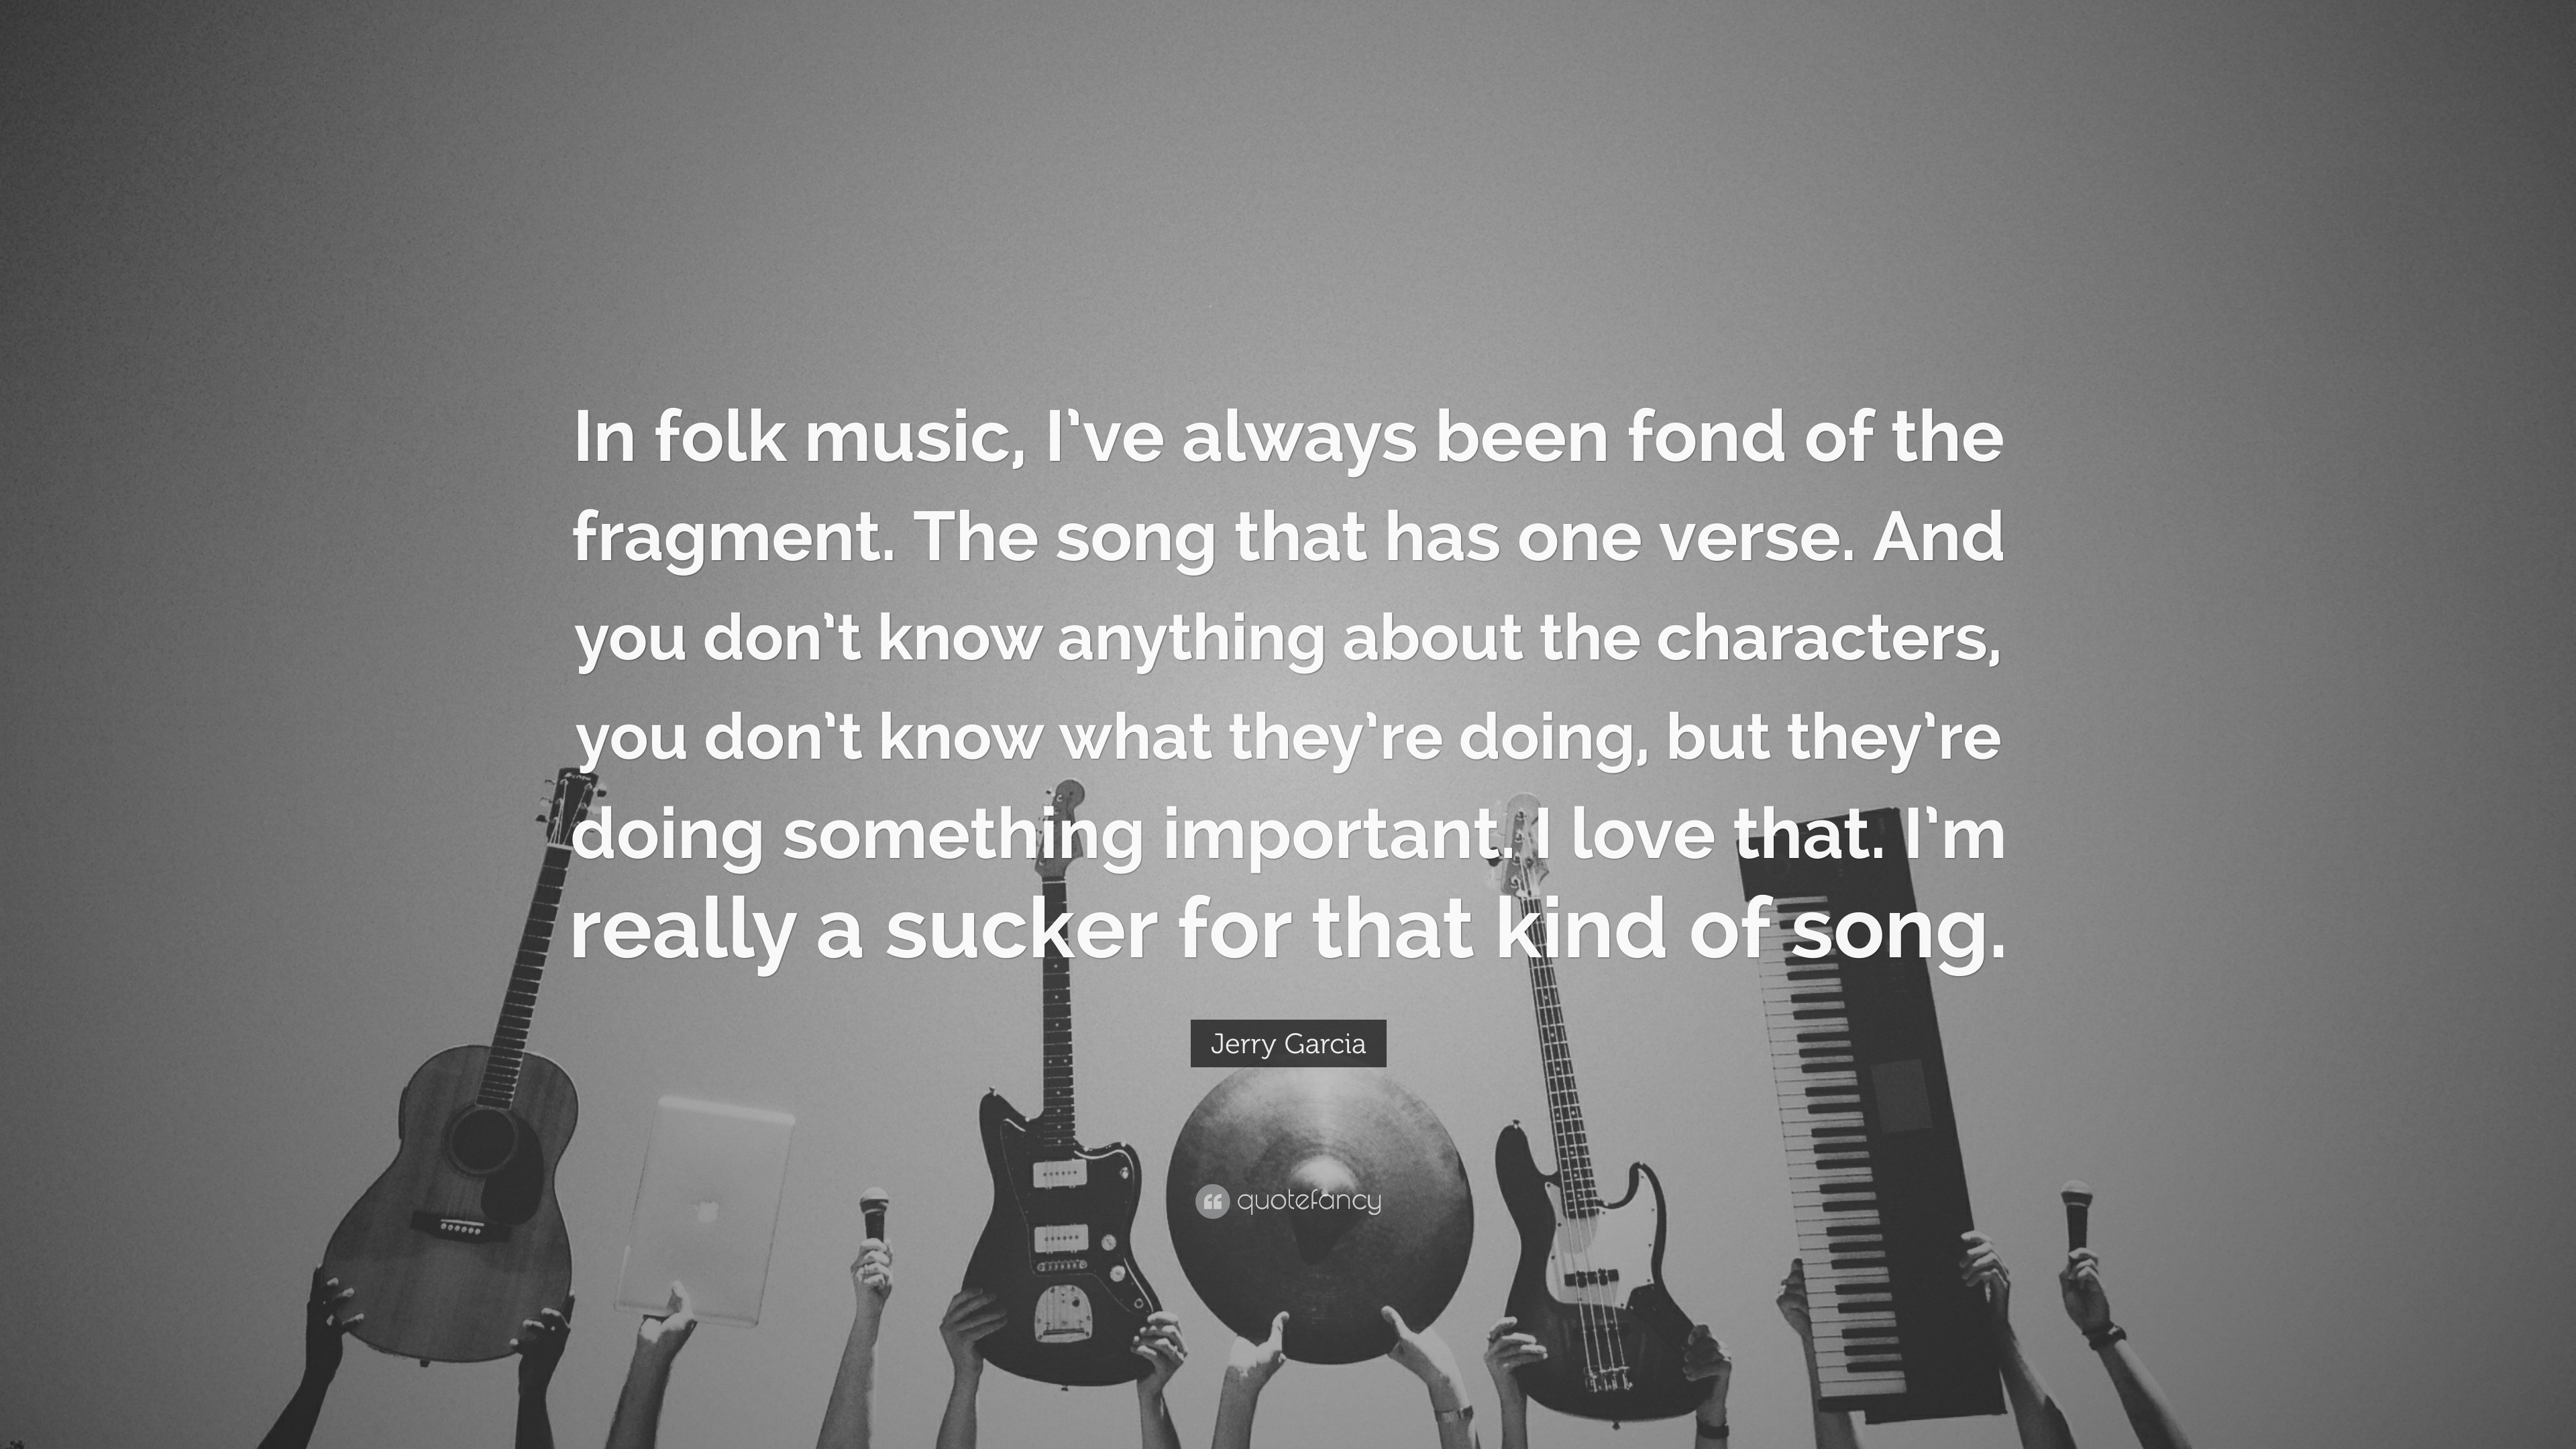 Jerry Garcia Quote: “In folk music, I've always been fond of the fragment.  The song that has one verse. And you don't know anything about the...”